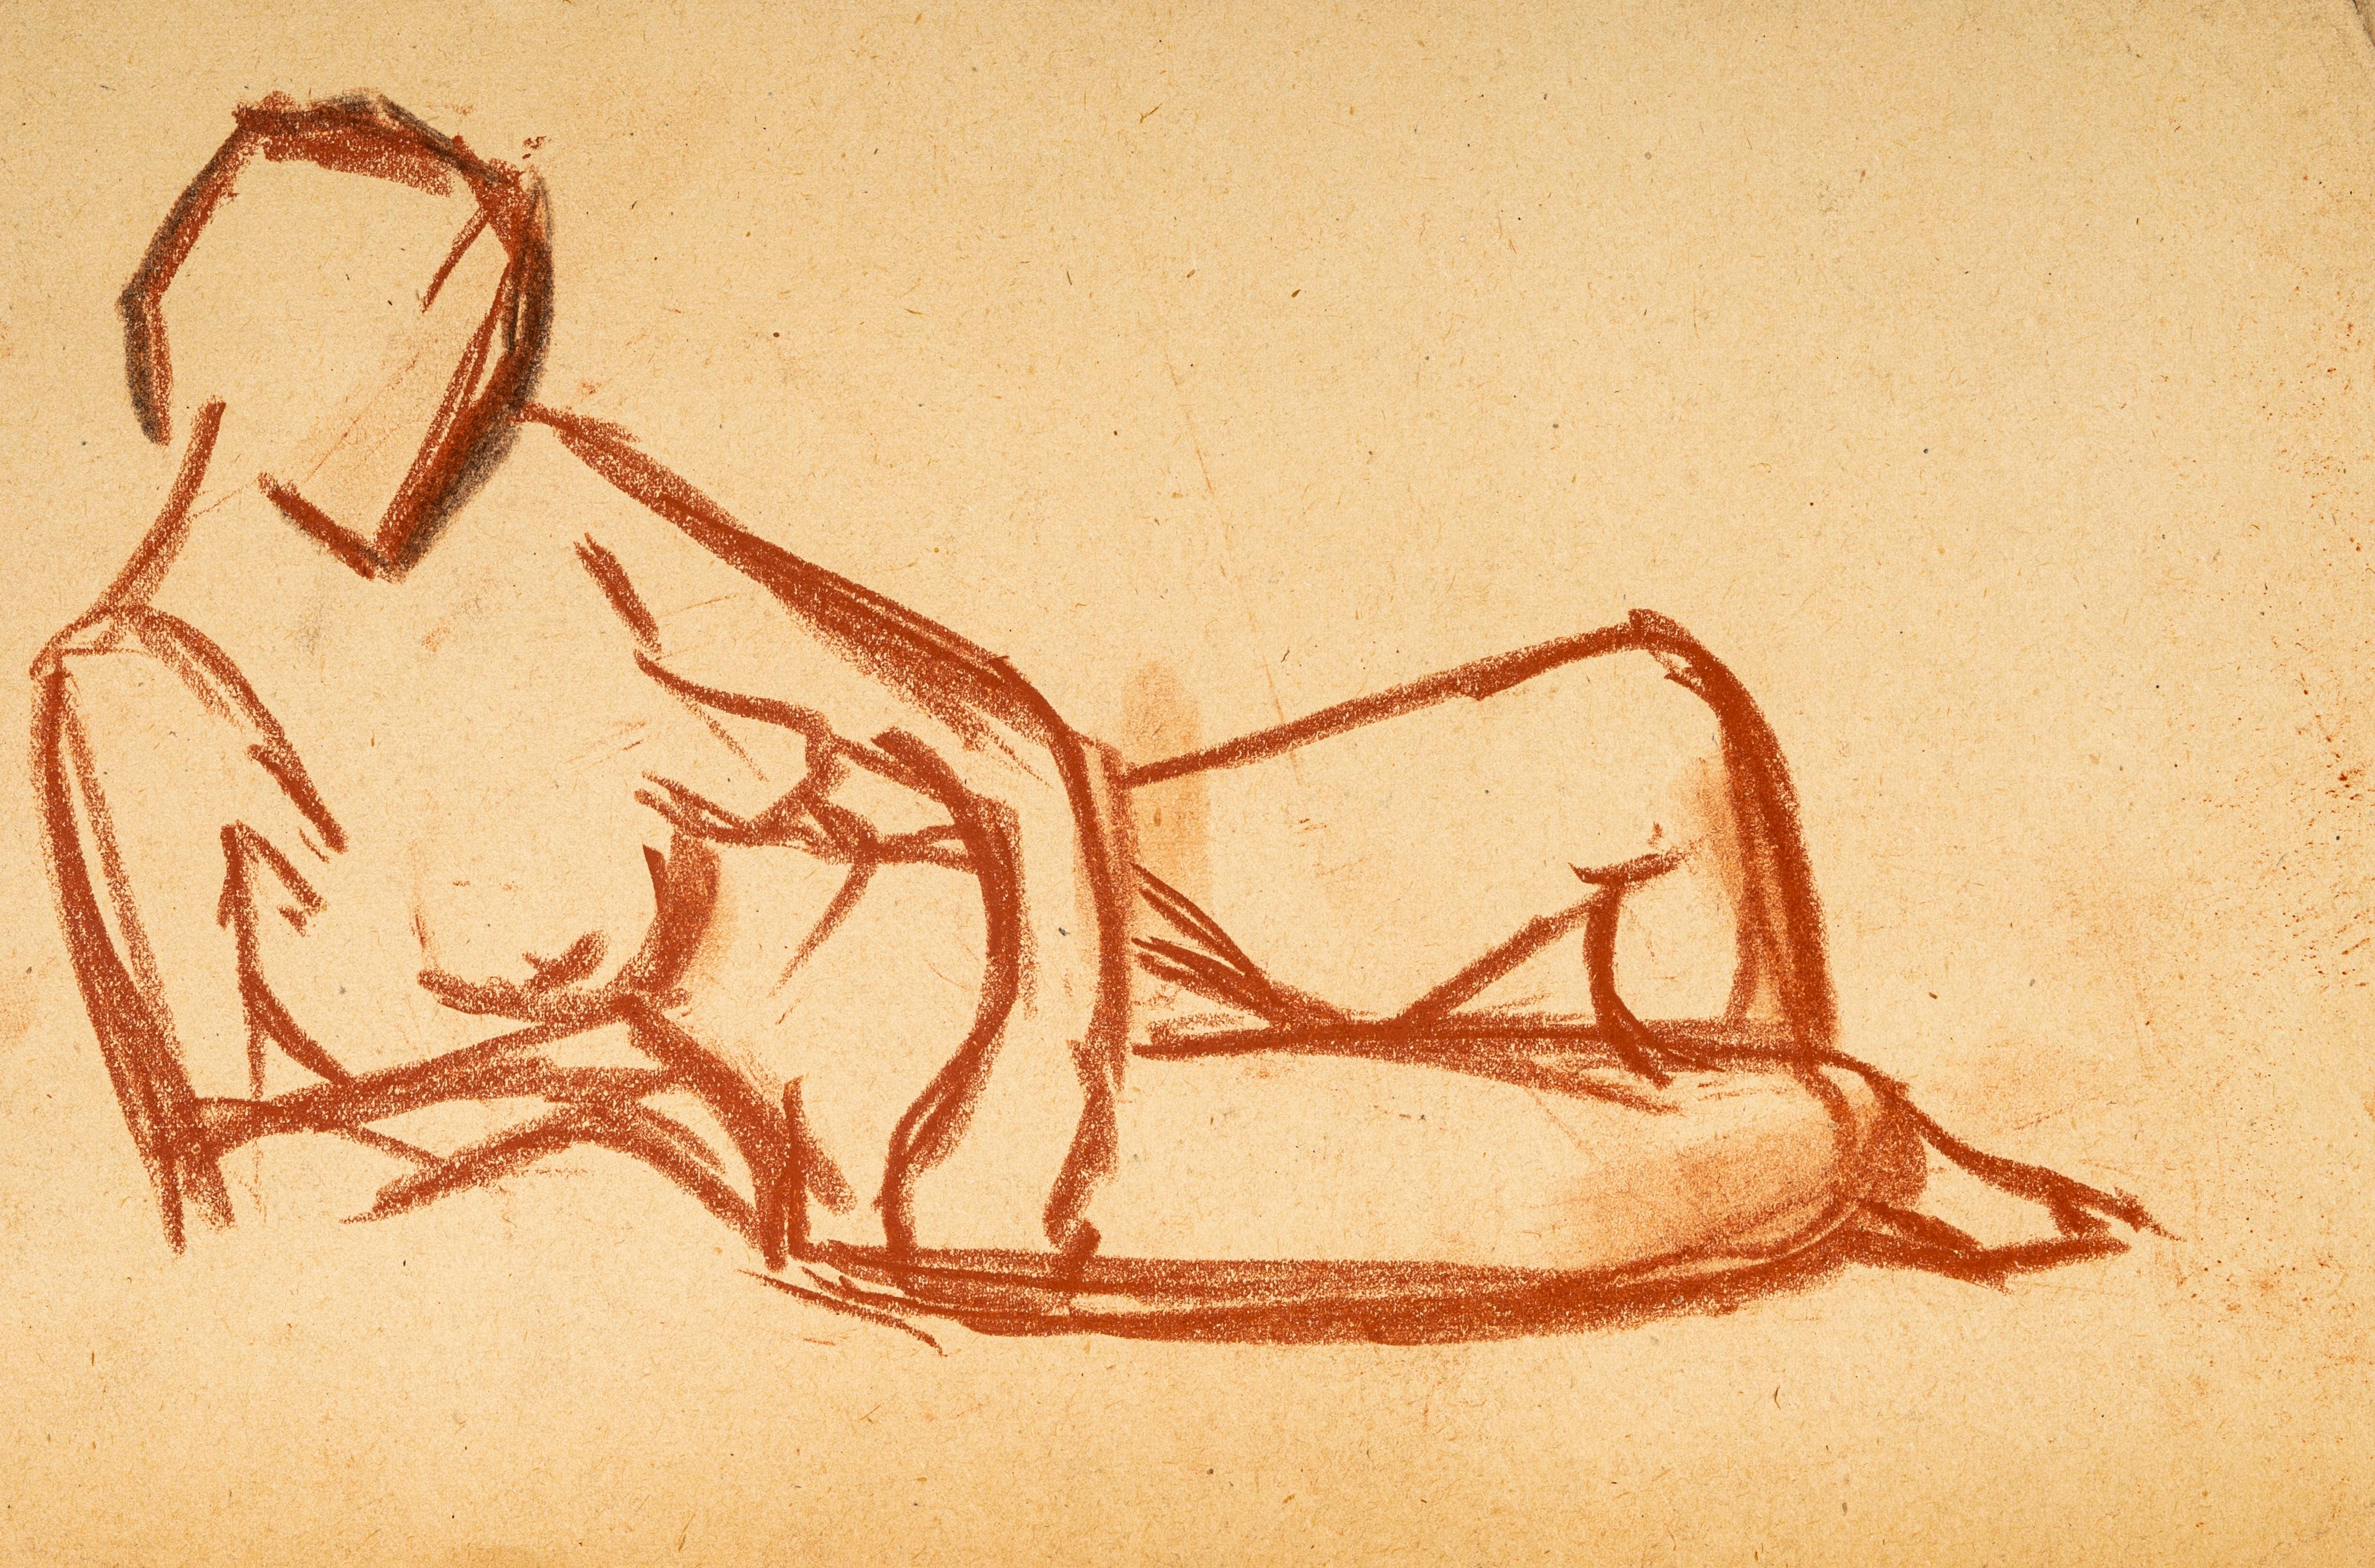 Lying Down Nude - Original Red Chalk Drawing by French Master Early 20th Century - Art by Unknown